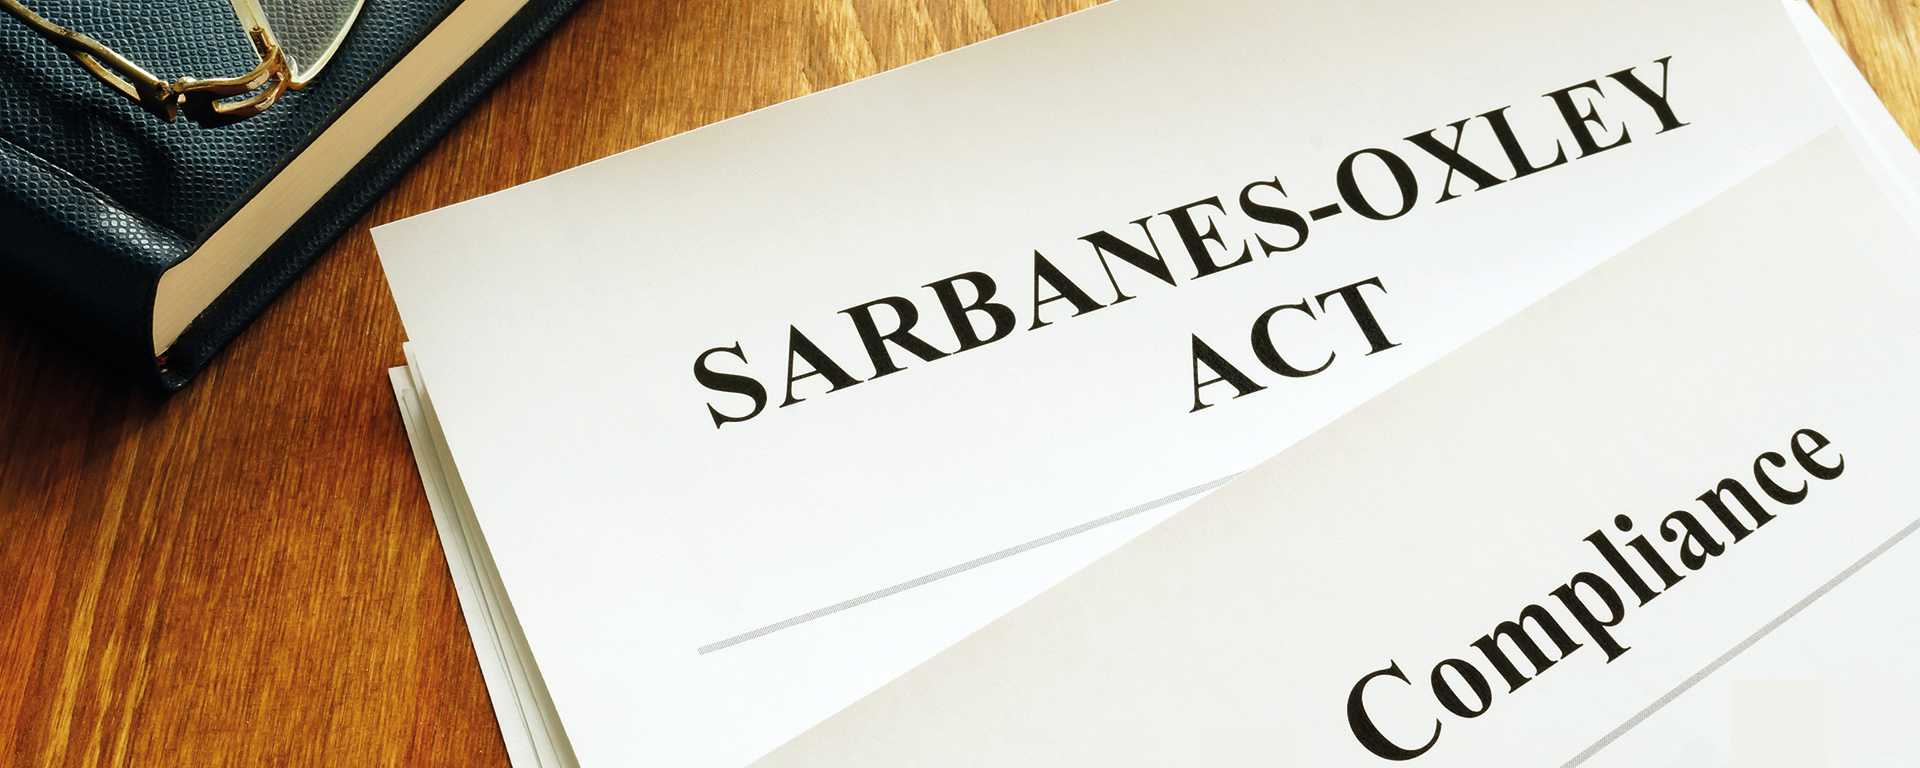 Legal Document With Sarbanes Oxley Compliance Act | Blog